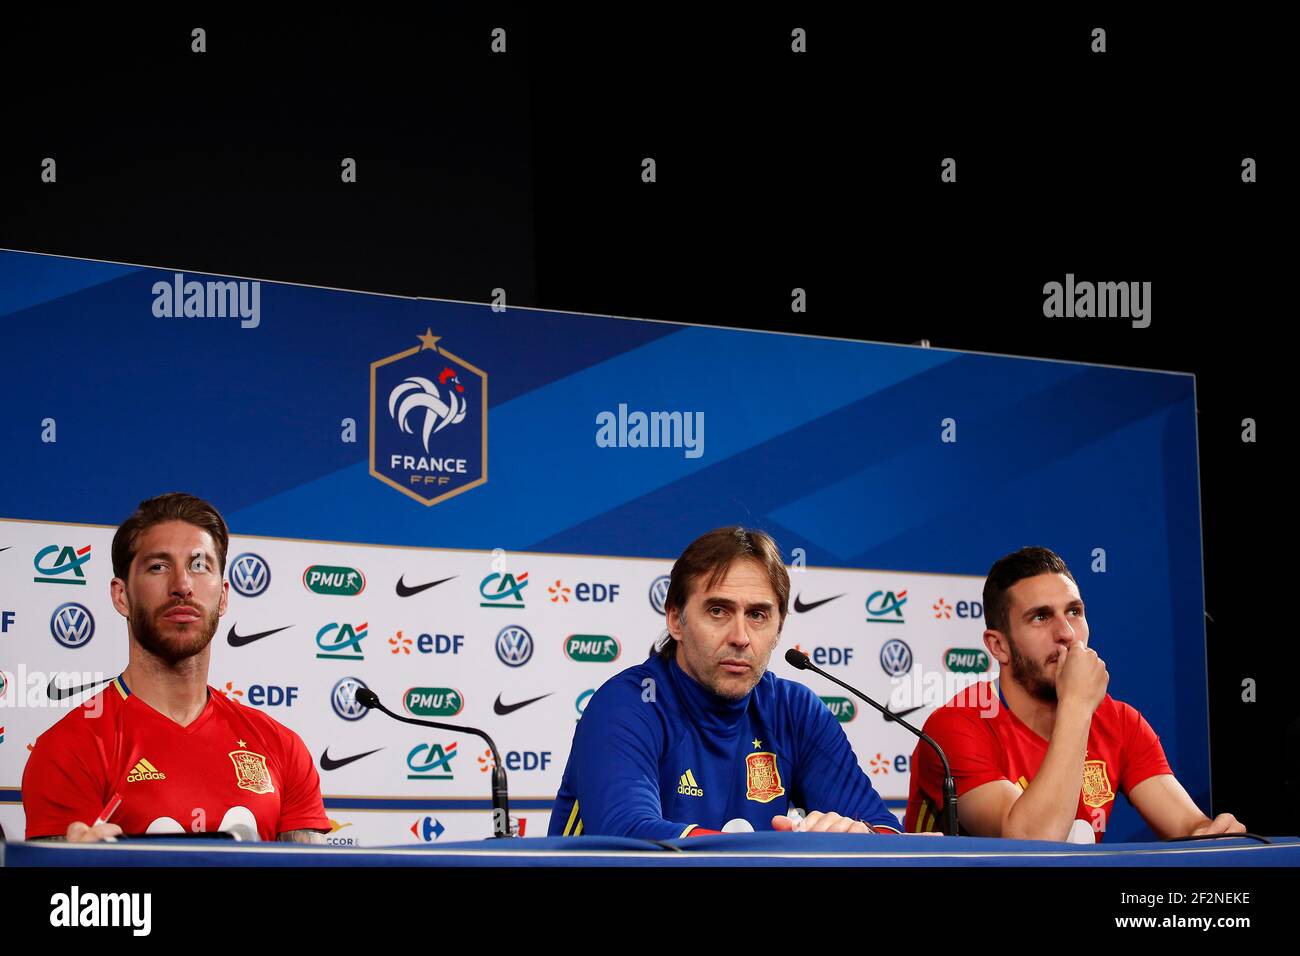 Spain's coach Julen Lopetegui flanked Spain's defender Sergio Ramos and Spain's midfielder Jorge Koke delivers a speech during the Press Conference of the Team of Spain and Training on March 27, 2017 at Stade de France in Saint-Denis, France - Photo Benjamin Cremel / DPPI Stock Photo